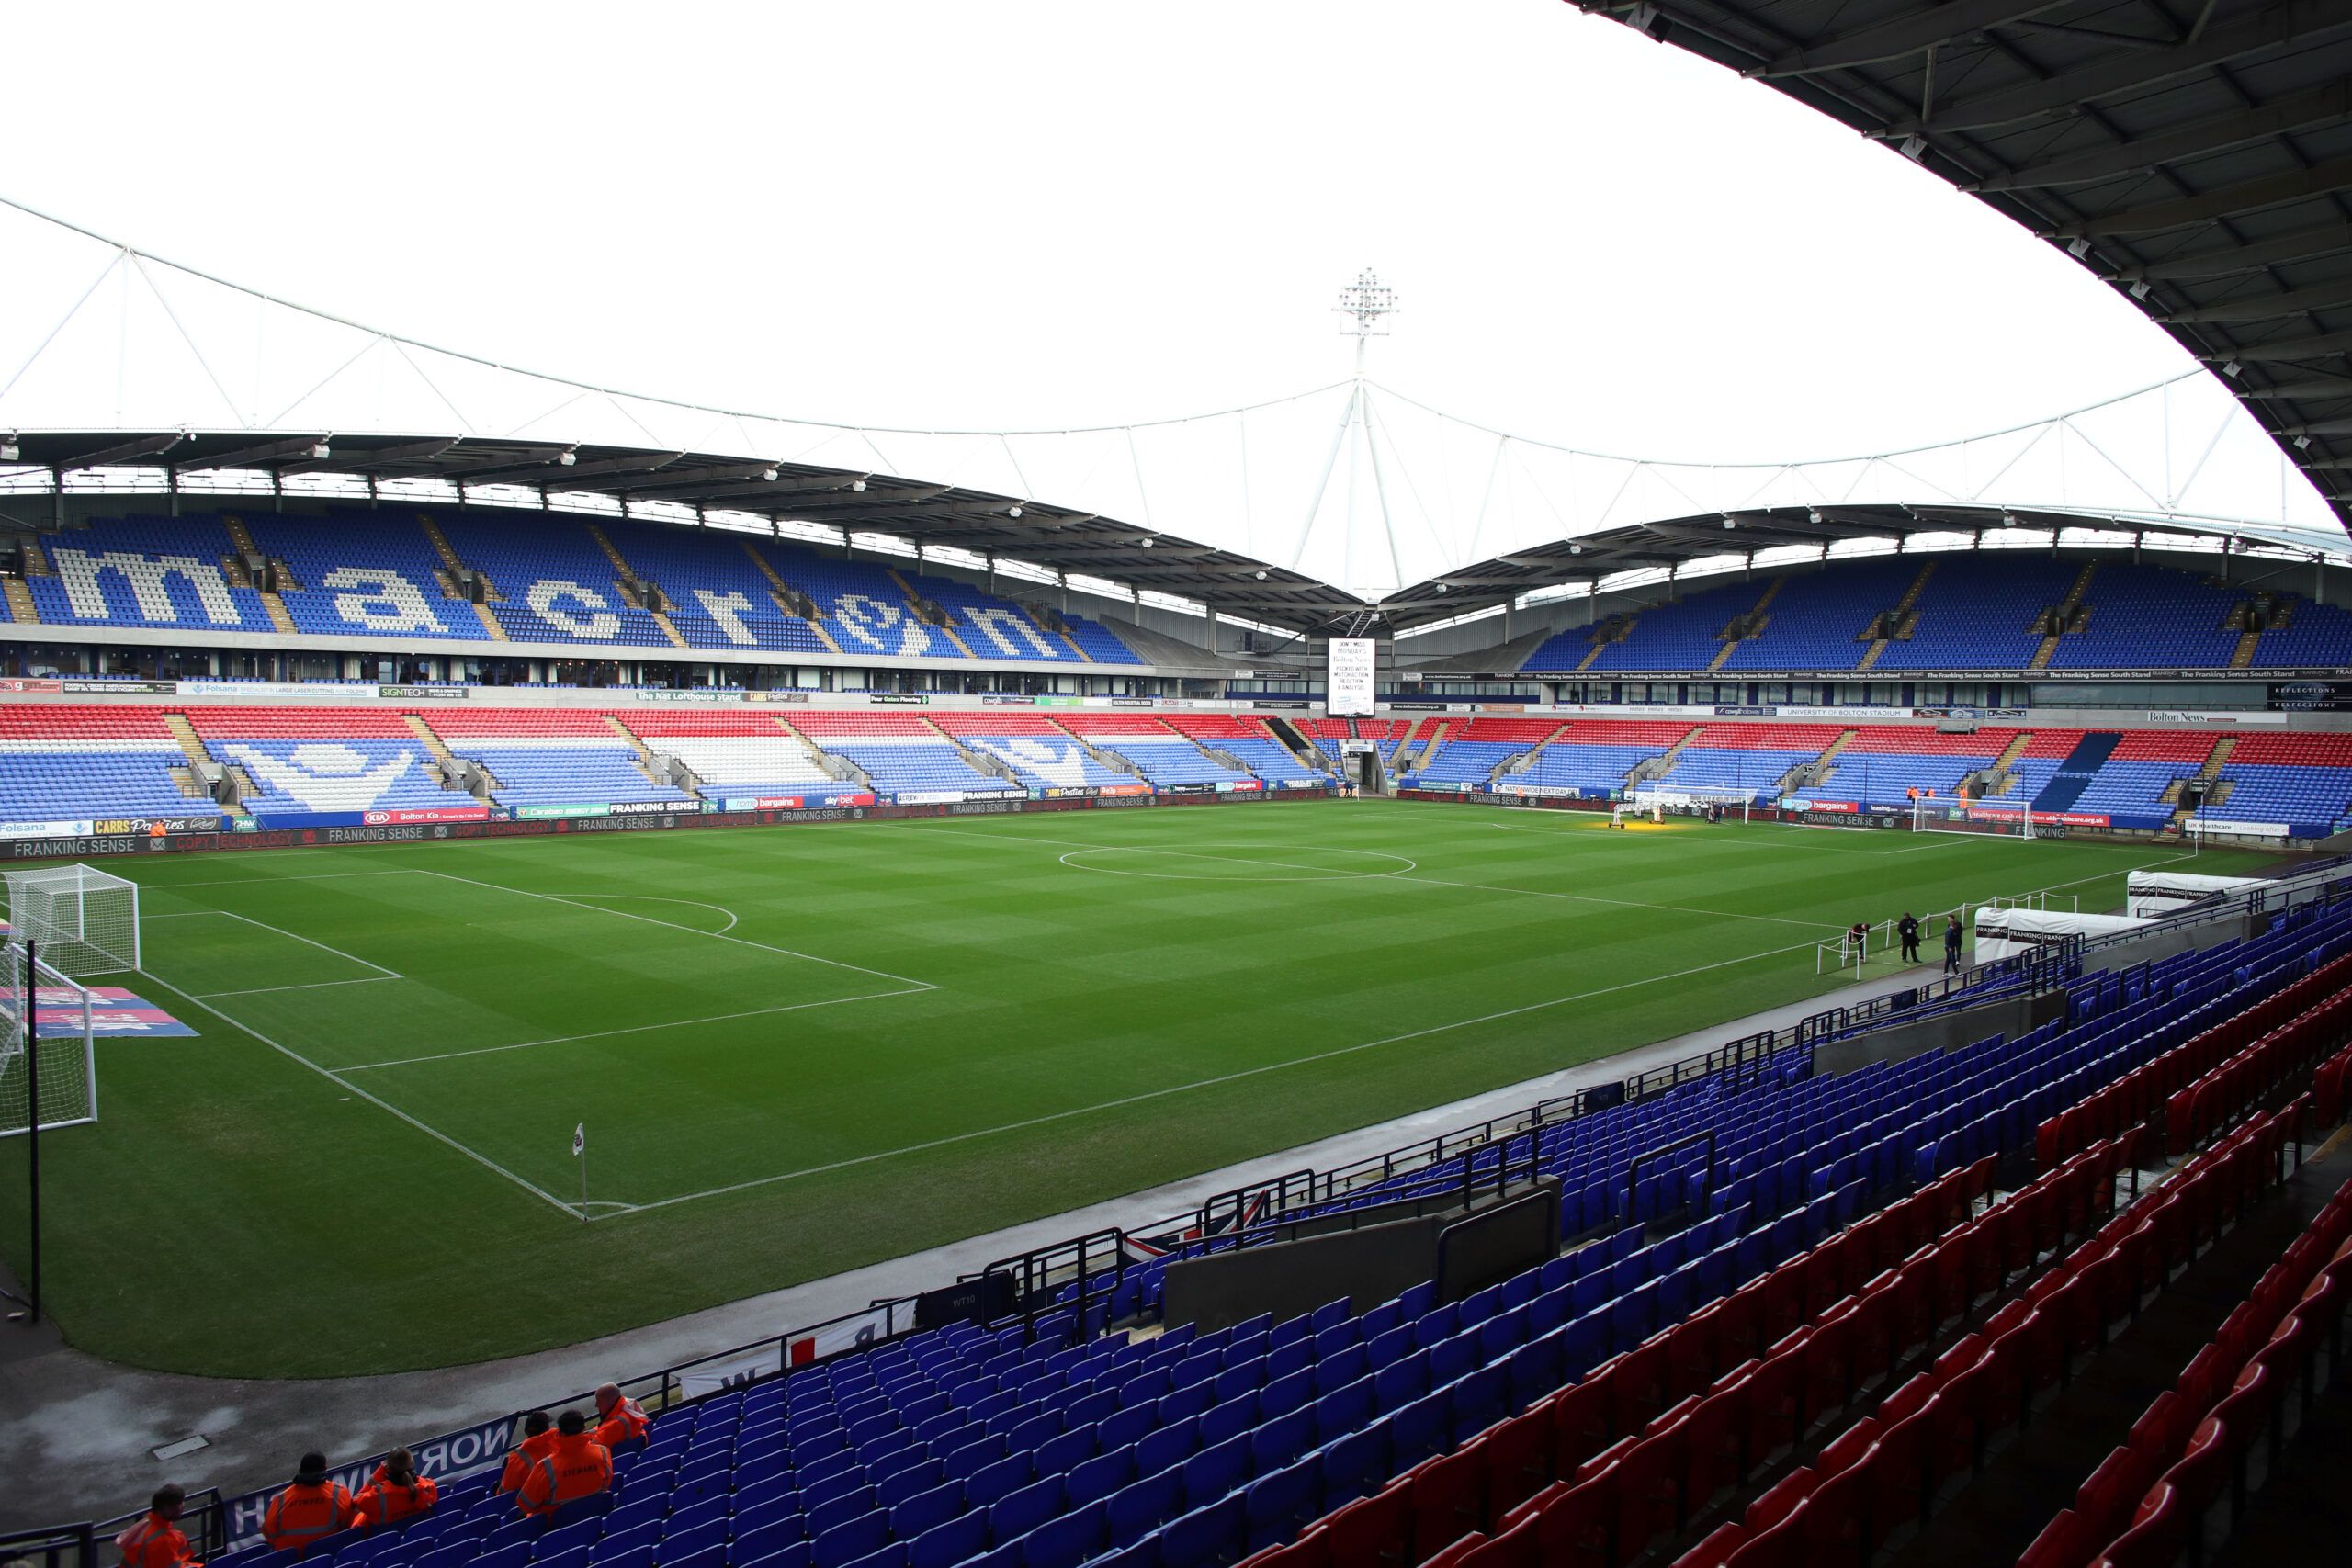 Soccer Football - League One - Bolton Wanderers v Milton Keynes Dons - University of Bolton Stadium, Bolton, Britain - November 16, 2019   General view inside the stadium before the match    Action Images/John Clifton    EDITORIAL USE ONLY. No use with unauthorized audio, video, data, fixture lists, club/league logos or 